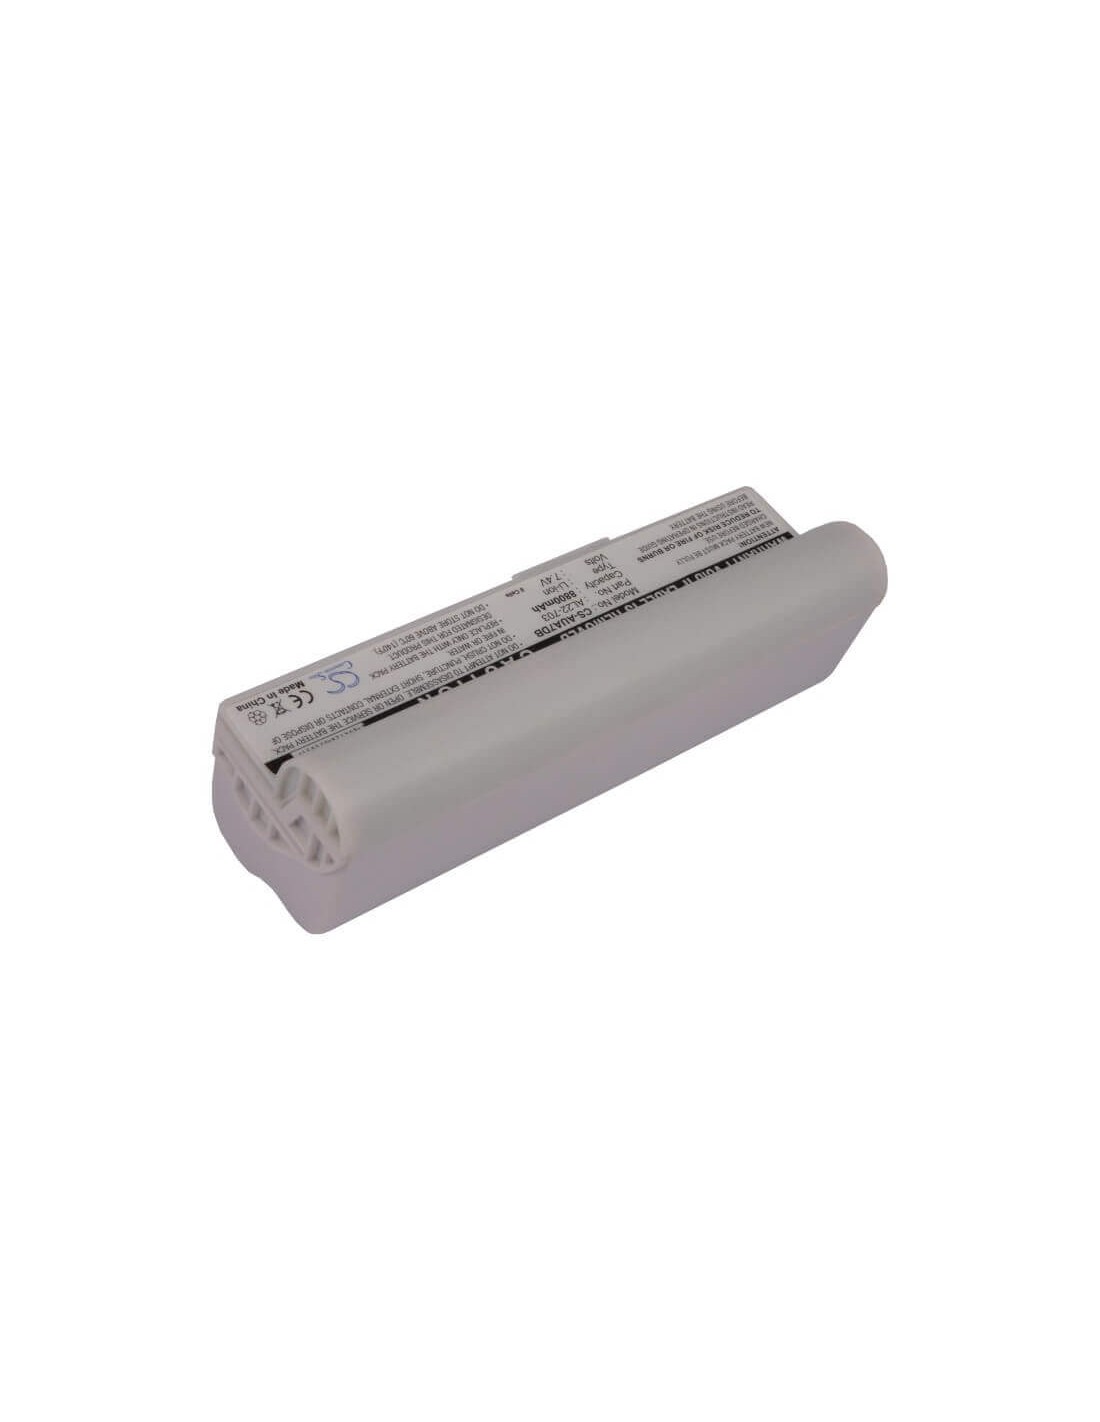 White Battery for Asus Eee Pc 703, Eee Pc 900a, Eee Pc 900ha 7.4V, 8800mAh - 65.12Wh